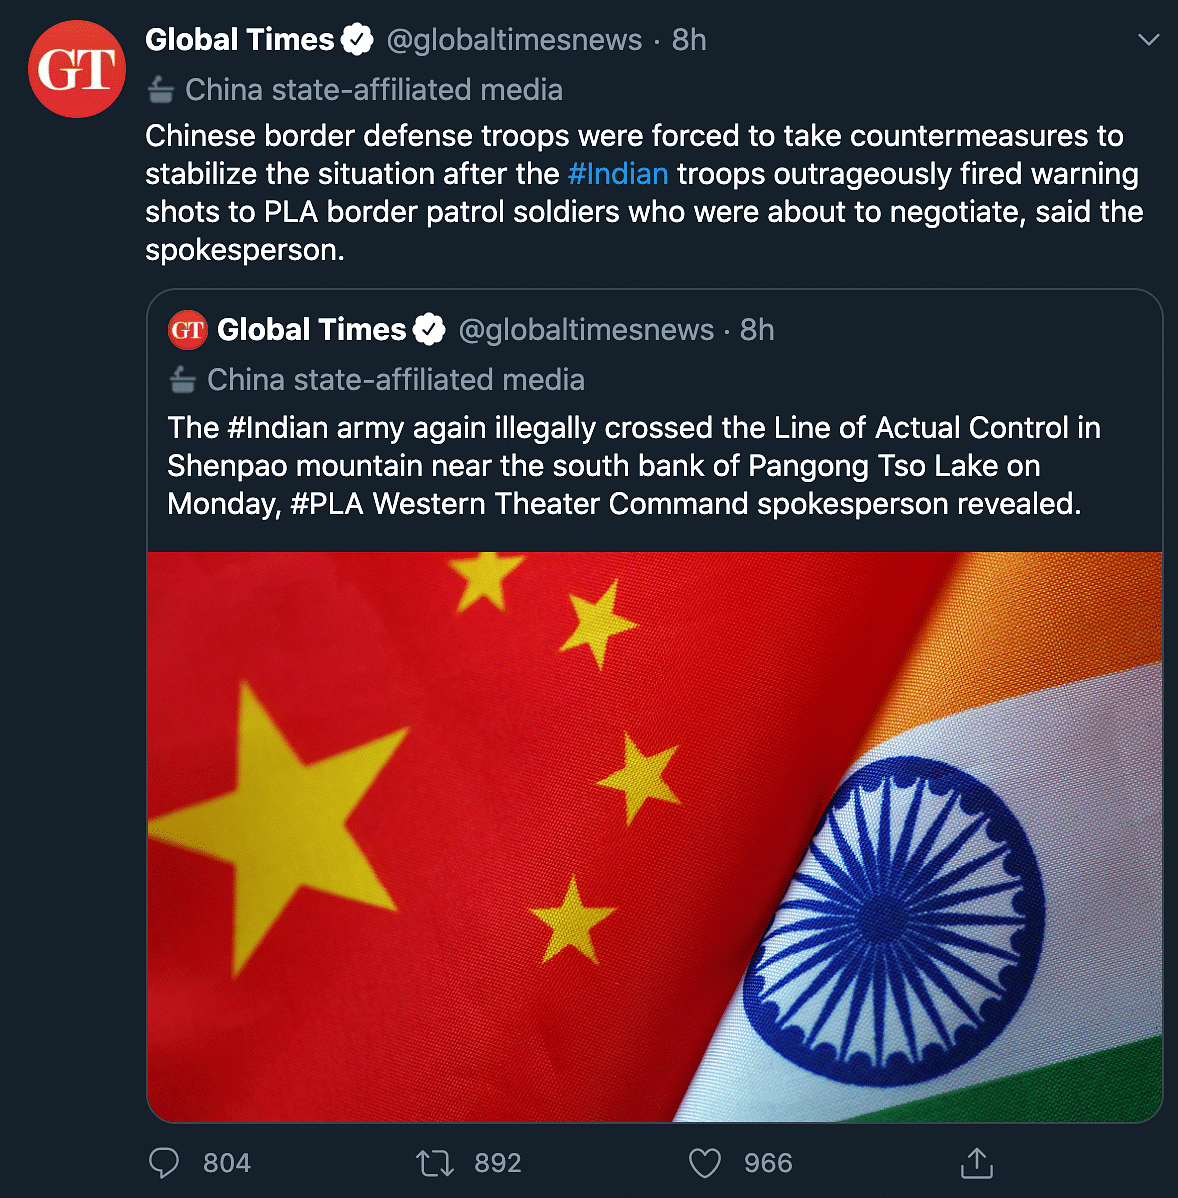 China earlier claimed the Indian Army crossed the LAC and its troops fired warning shots to PLA patrol soldiers.